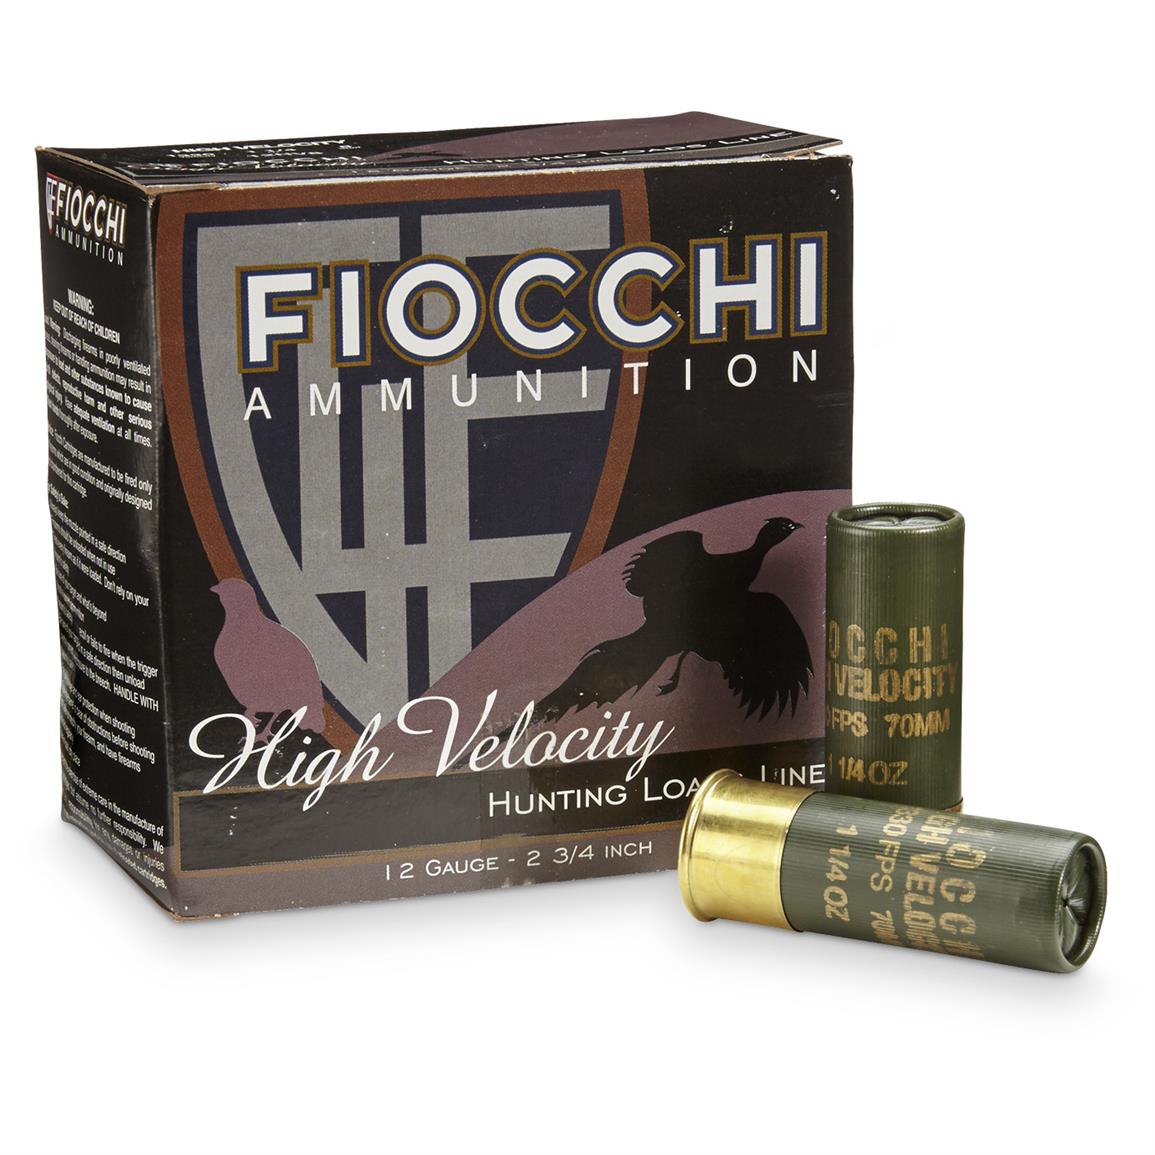 Fiocchi 12 Gauge 2 3/4 inch 1 1/4 ozs. High Velocity Loads, 25 rounds